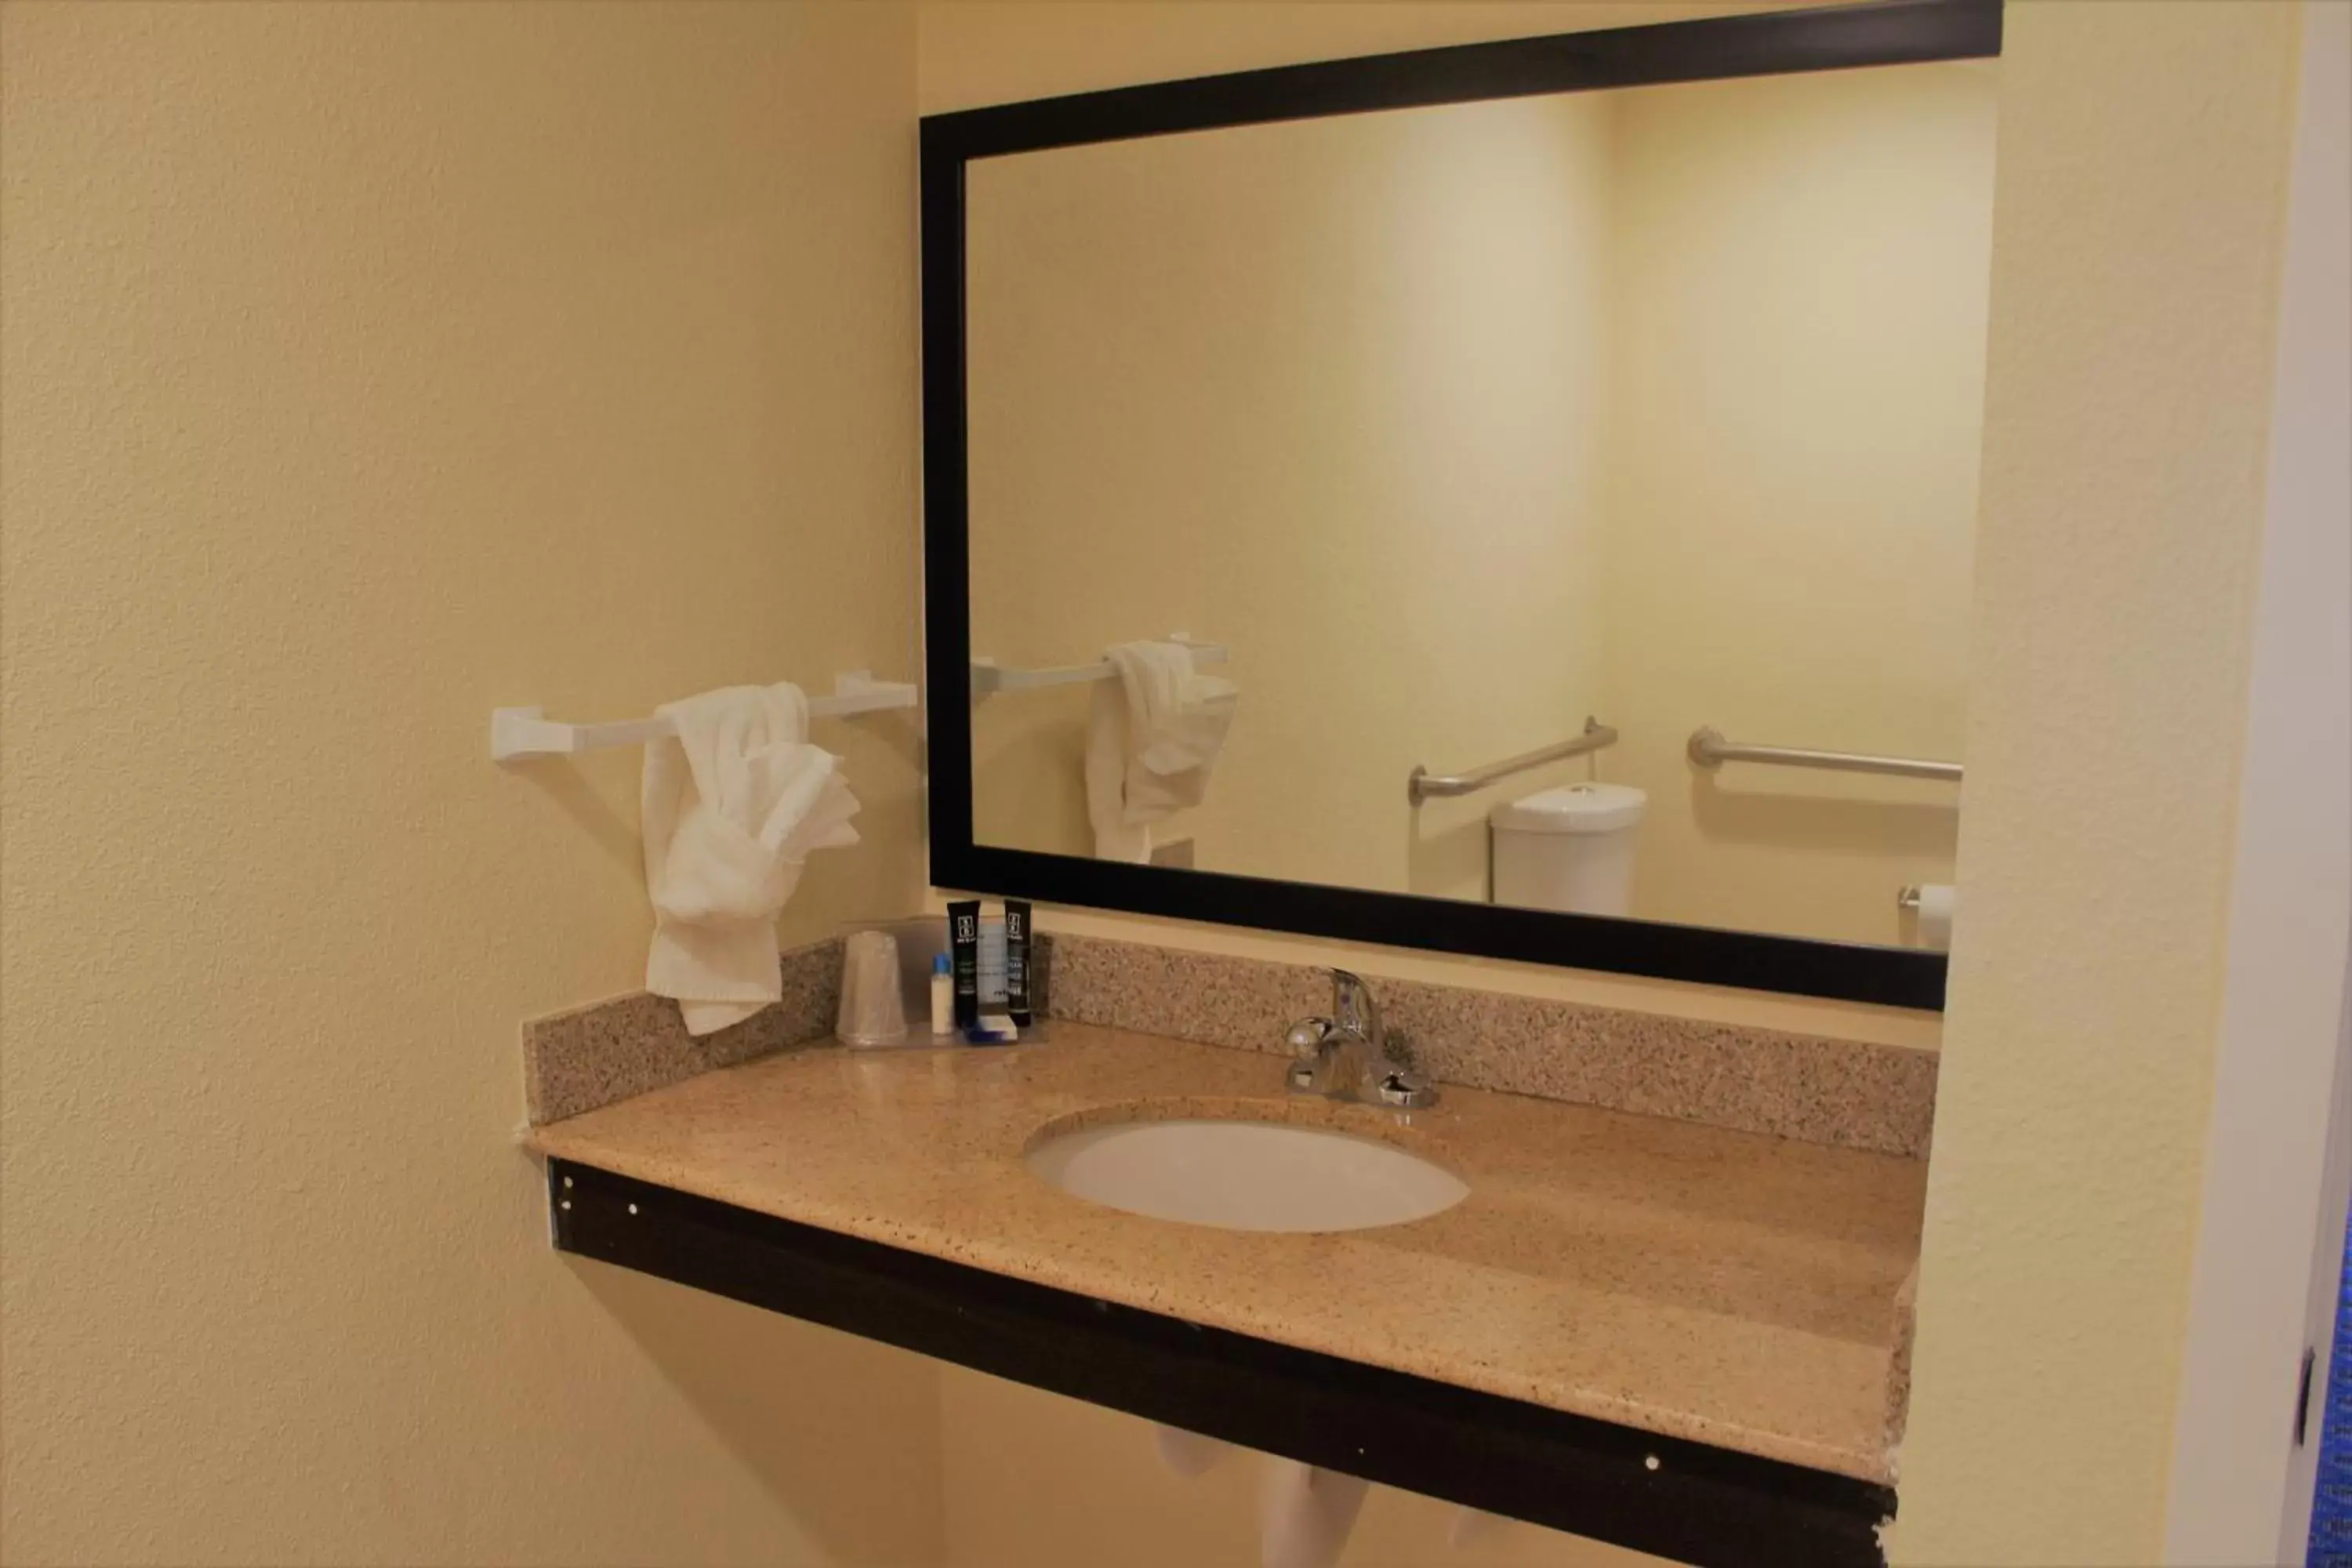 Bathroom in Oregon Trail Inn and Suites